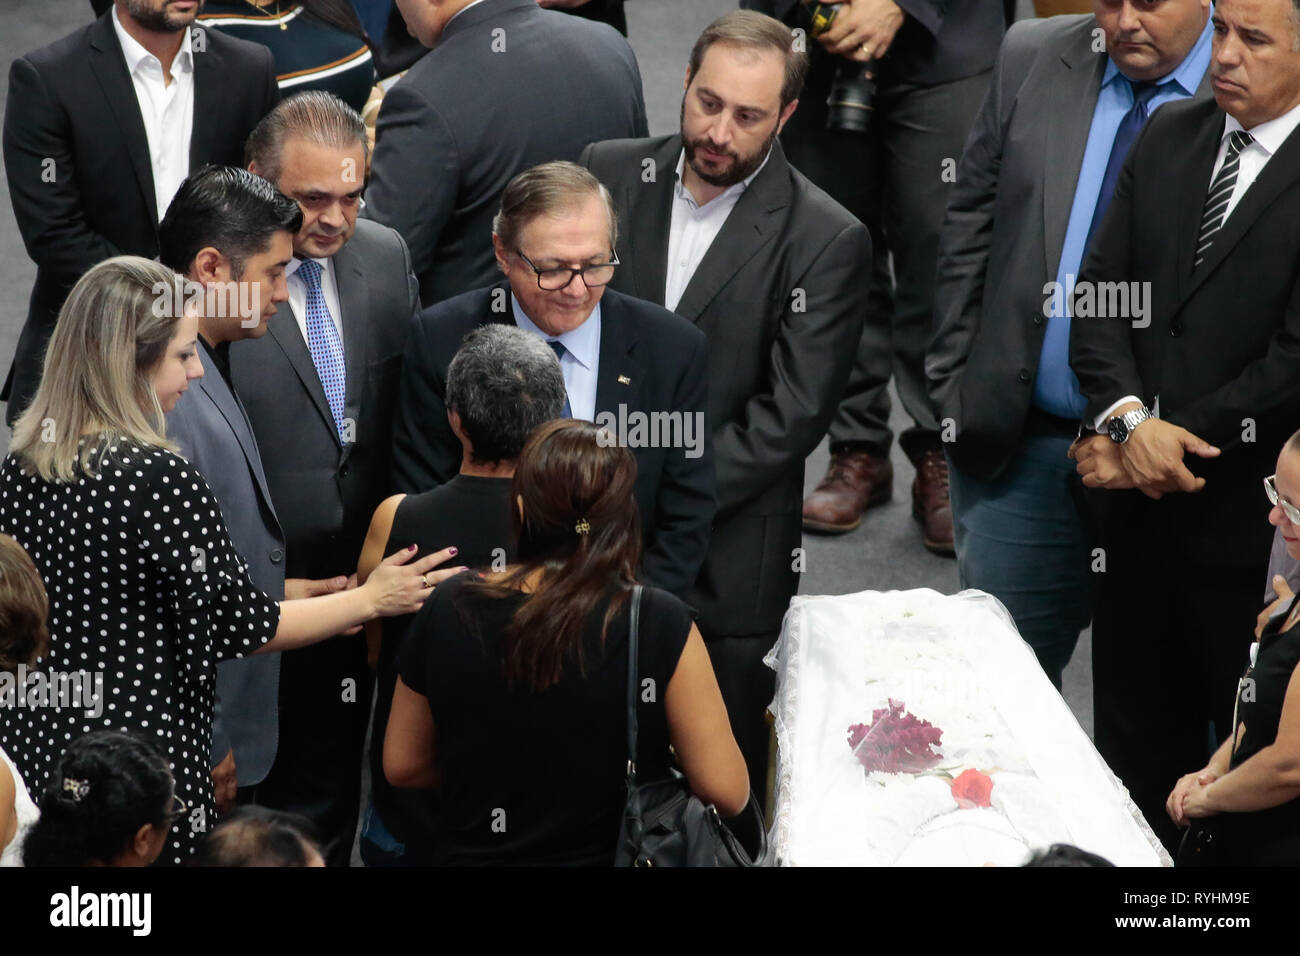 Suzano, Brazil. 14th Mar, 2019. SP - Suzano - 03/14/2019 - Attack at Suzano School Velorio das Vitimas - Minister of Education Ricardo Velez during the wake of the victims of the Raul Brasil State School attack, where 2 shooters ex-school students opened fire killing 5 students and 2 officials, leaving about 11 injured, then one of the marksmen killed the other and the same committed suicide. The river is expected to continue until 4 pm. Photo: Marcello Zambrana/AGIF Credit: AGIF/Alamy Live News Stock Photo